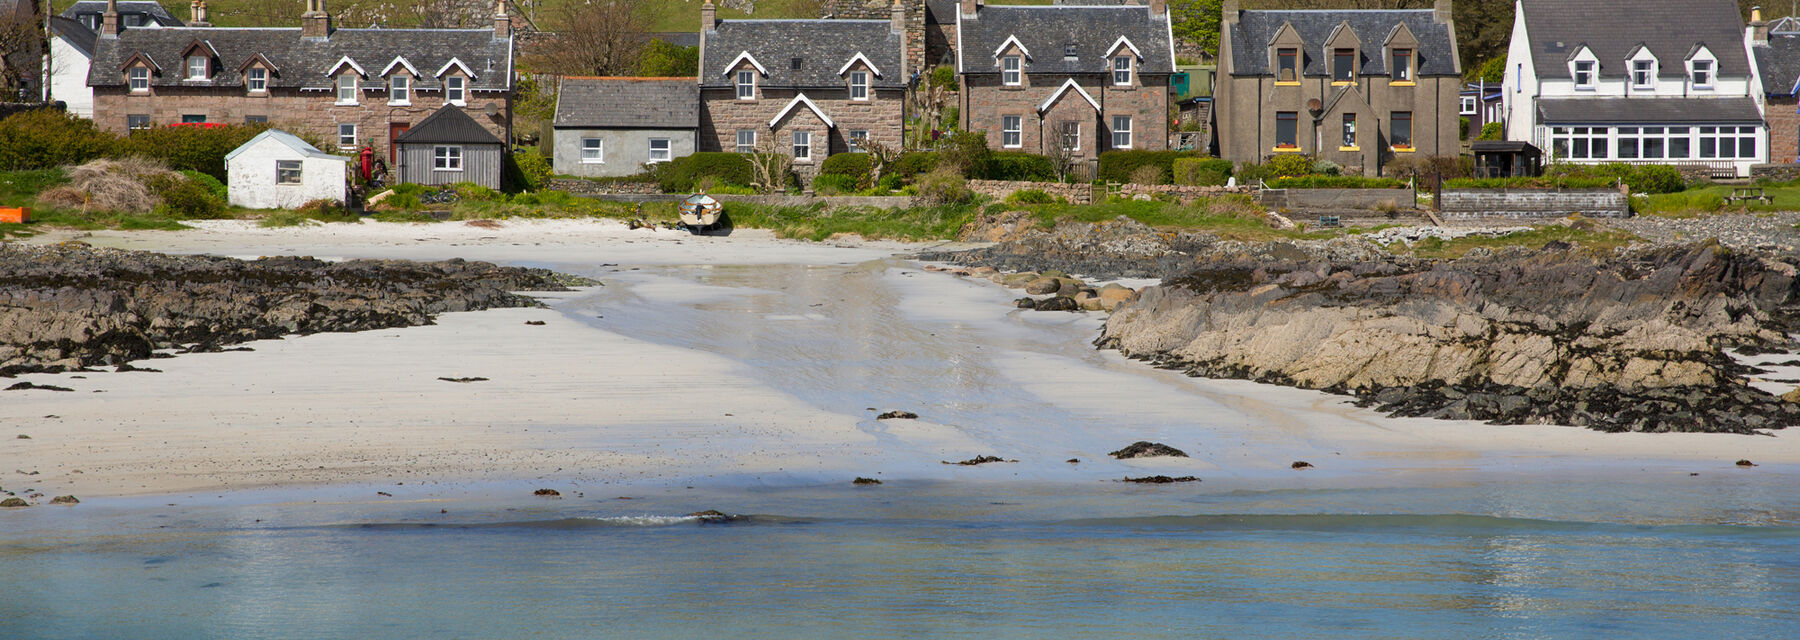 A white sandy beach on Iona, with the turquoise sea in the foreground. Houses and a hill are in the background.